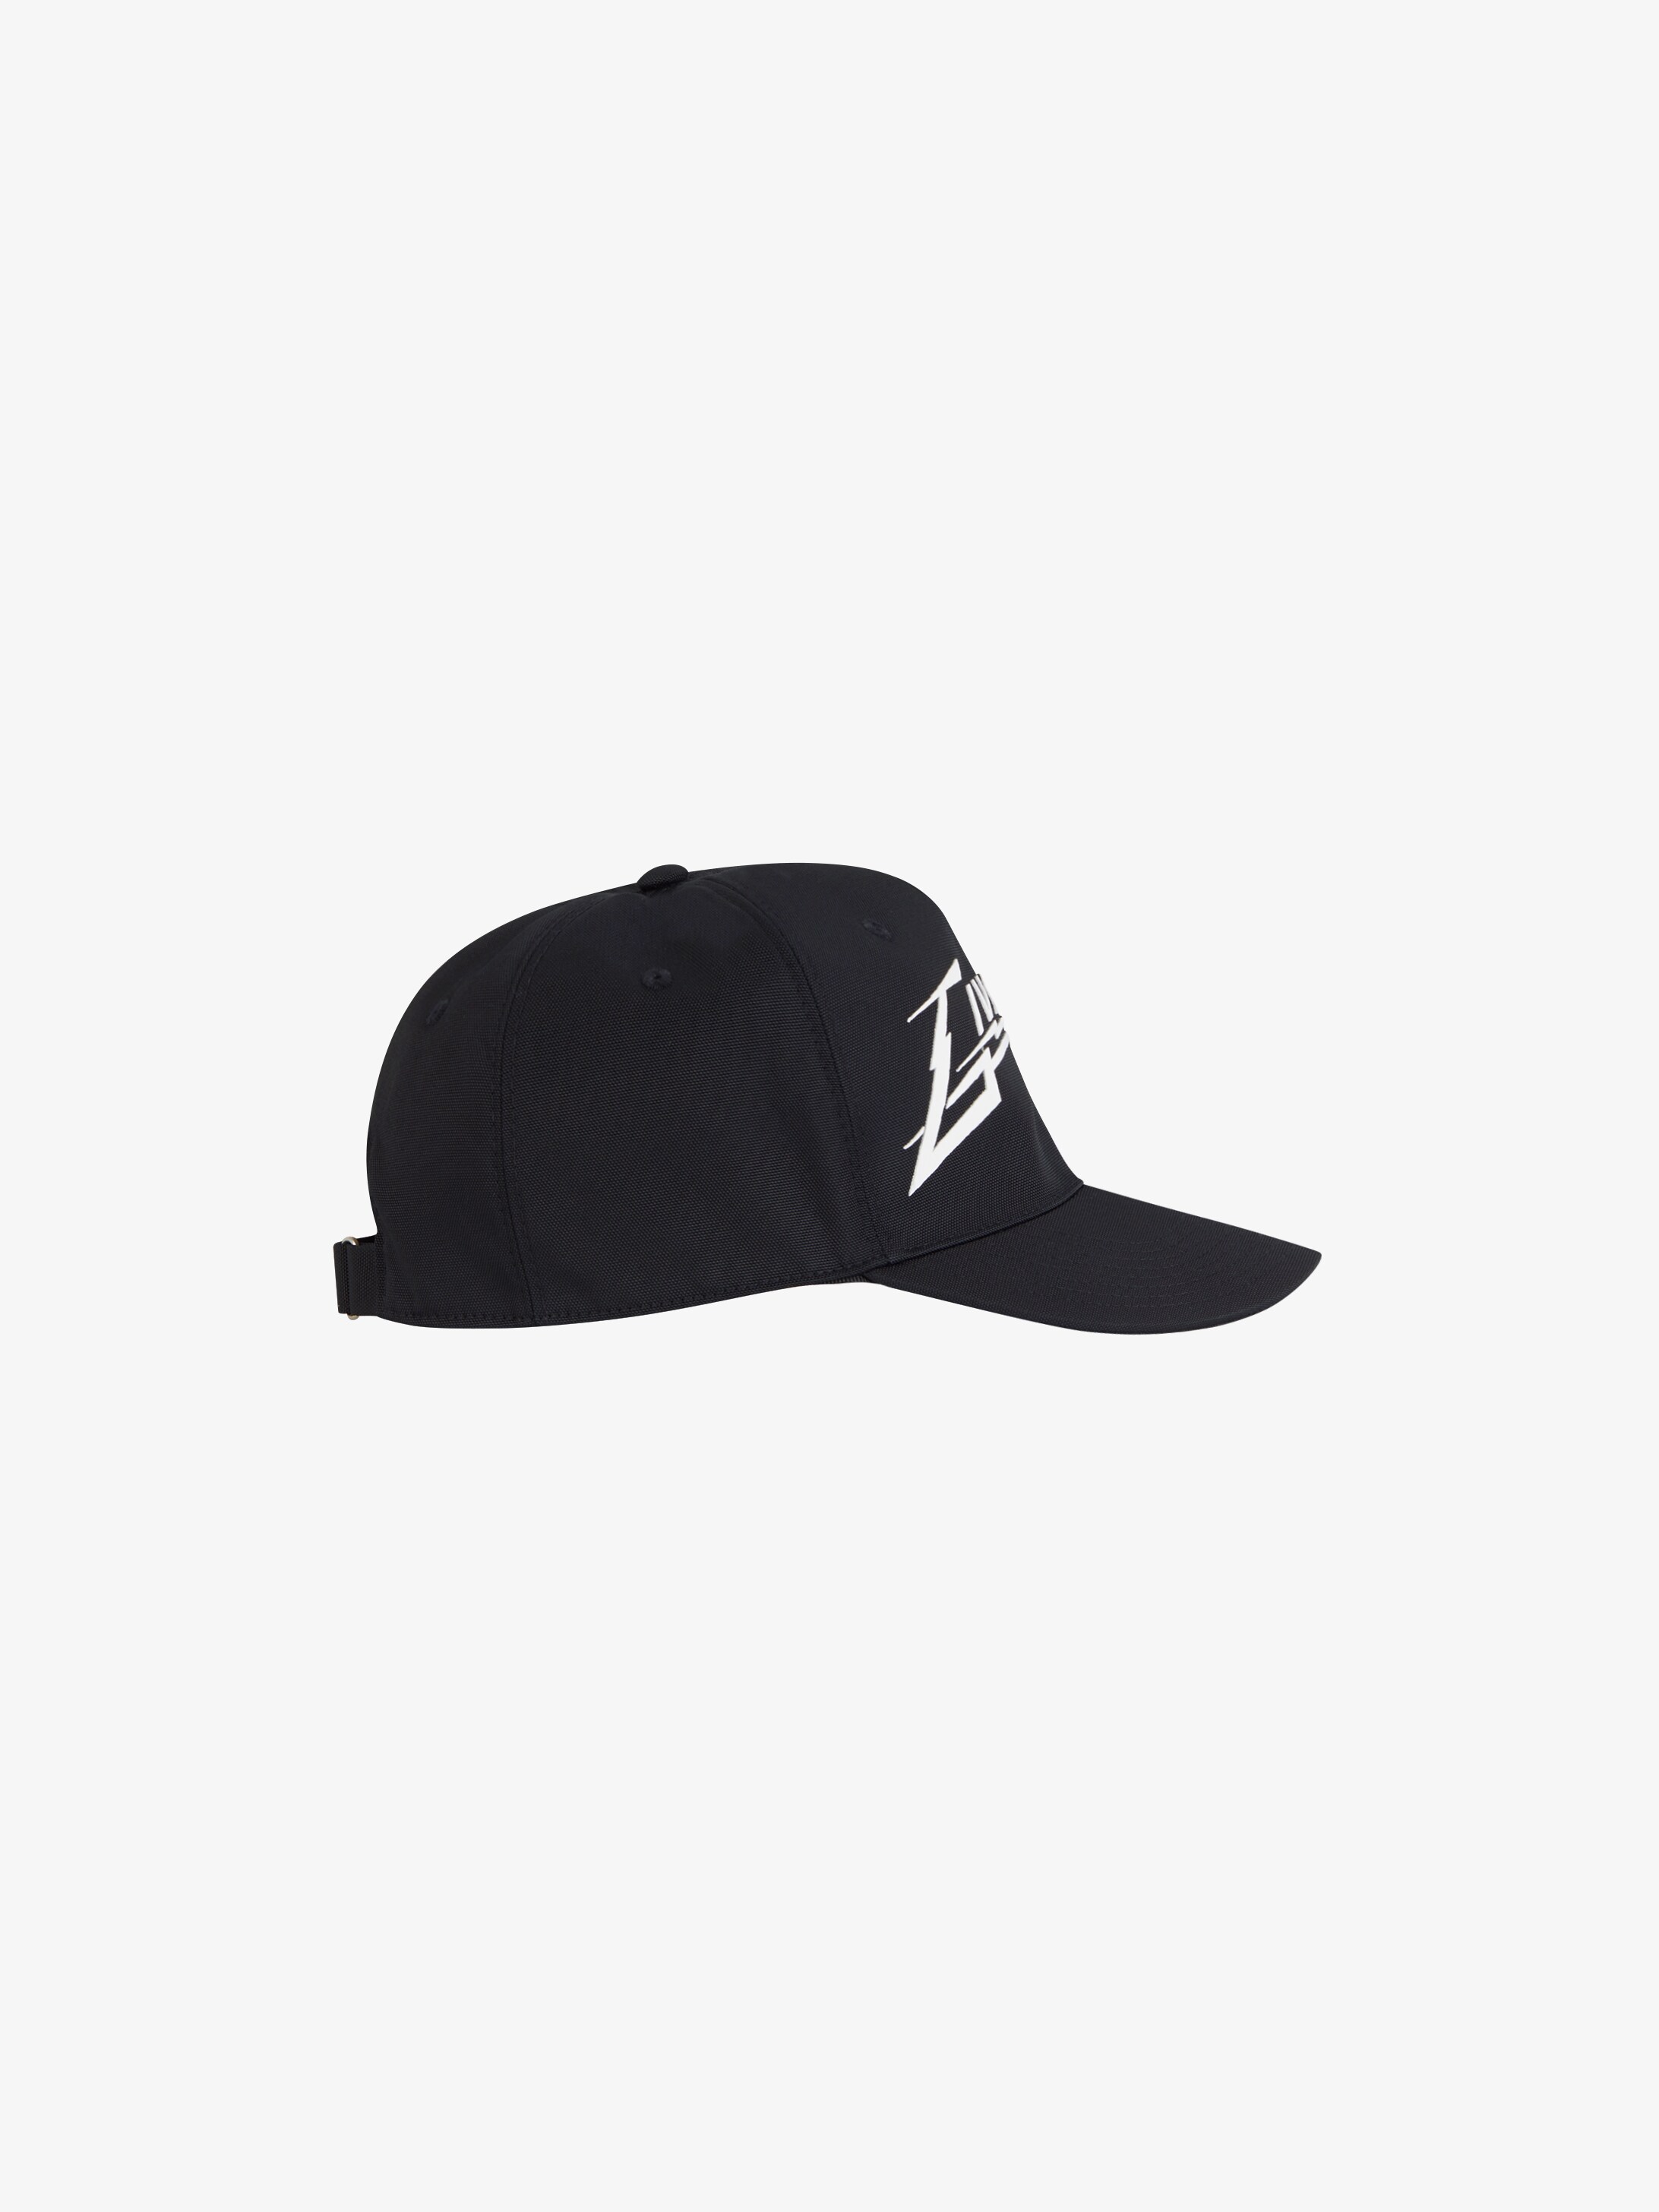 givenchy cap womens